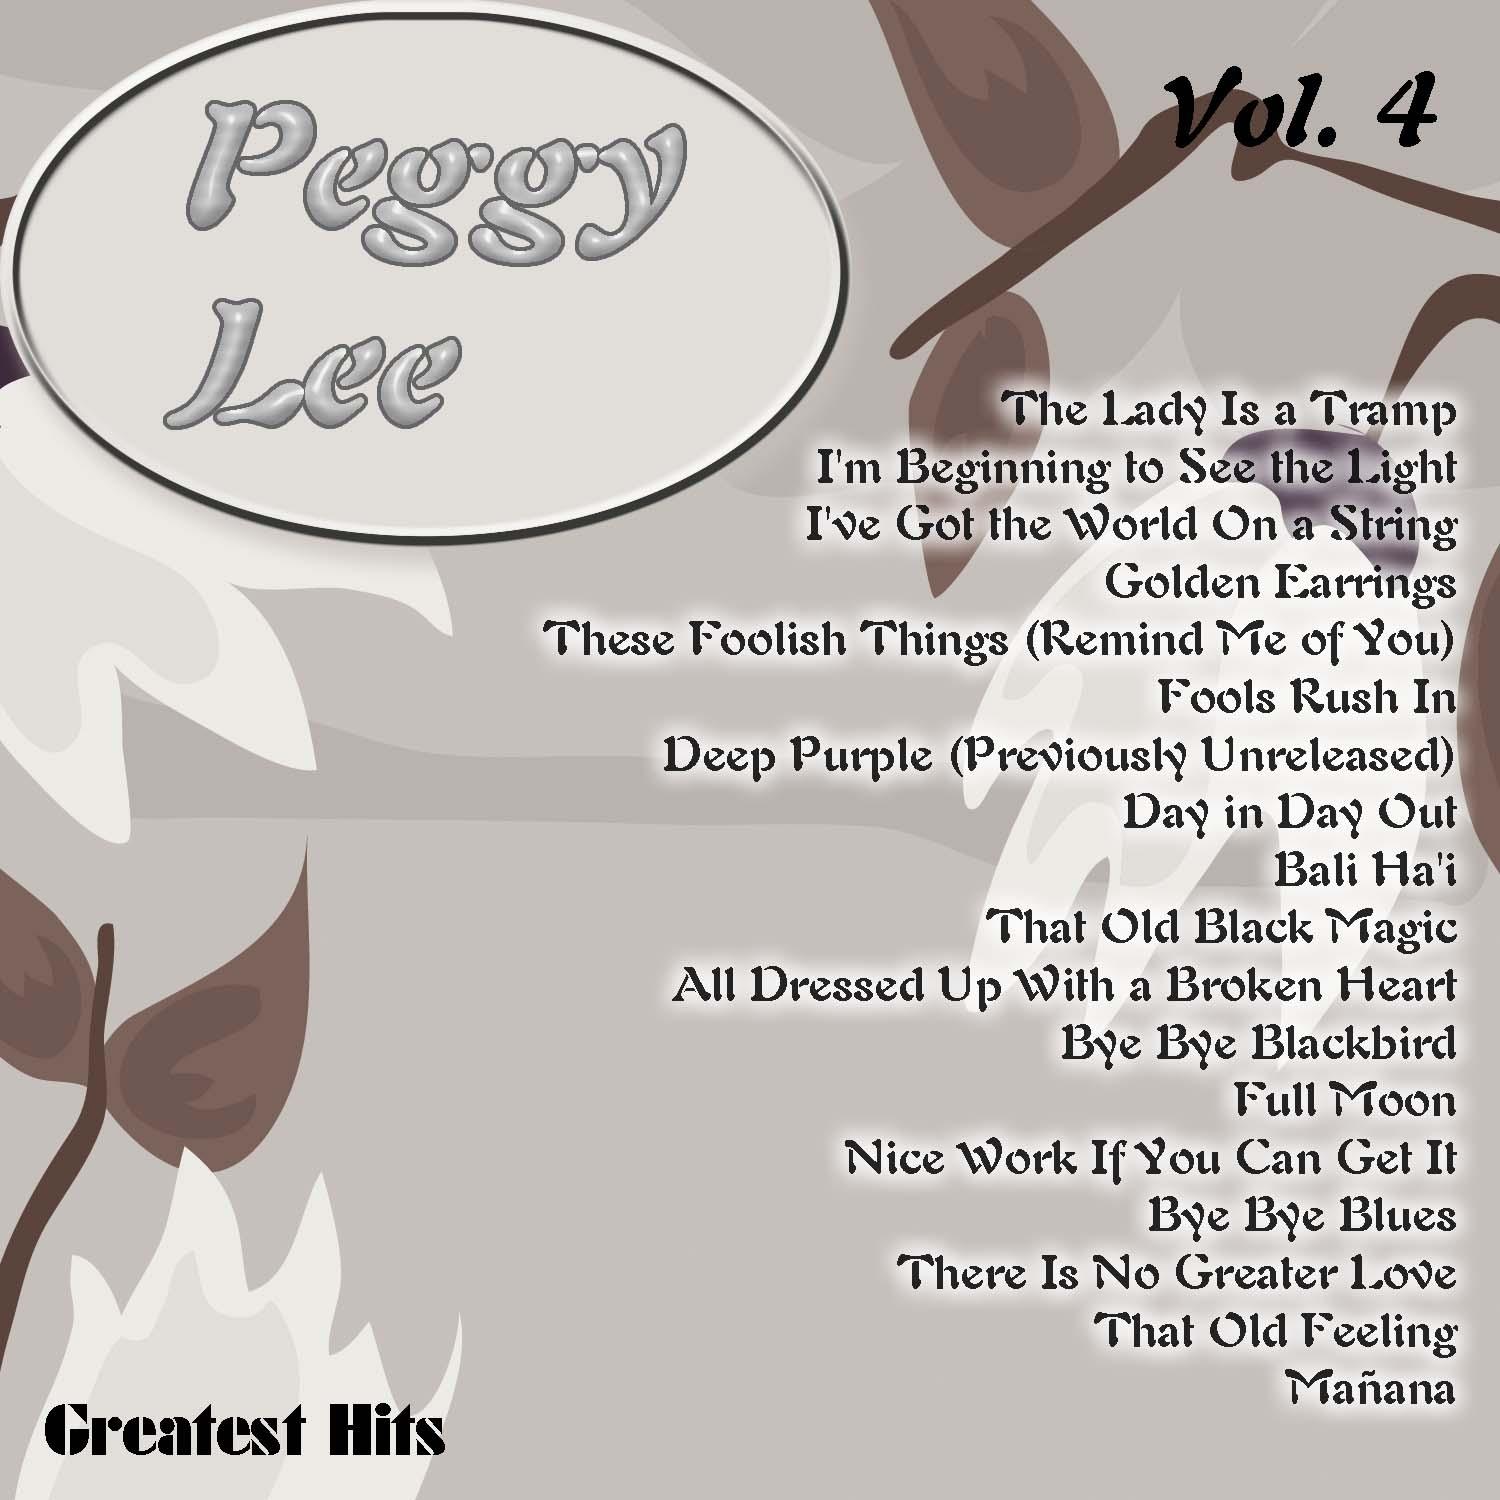 Greatest Hits: Peggy Lee Vol. 4